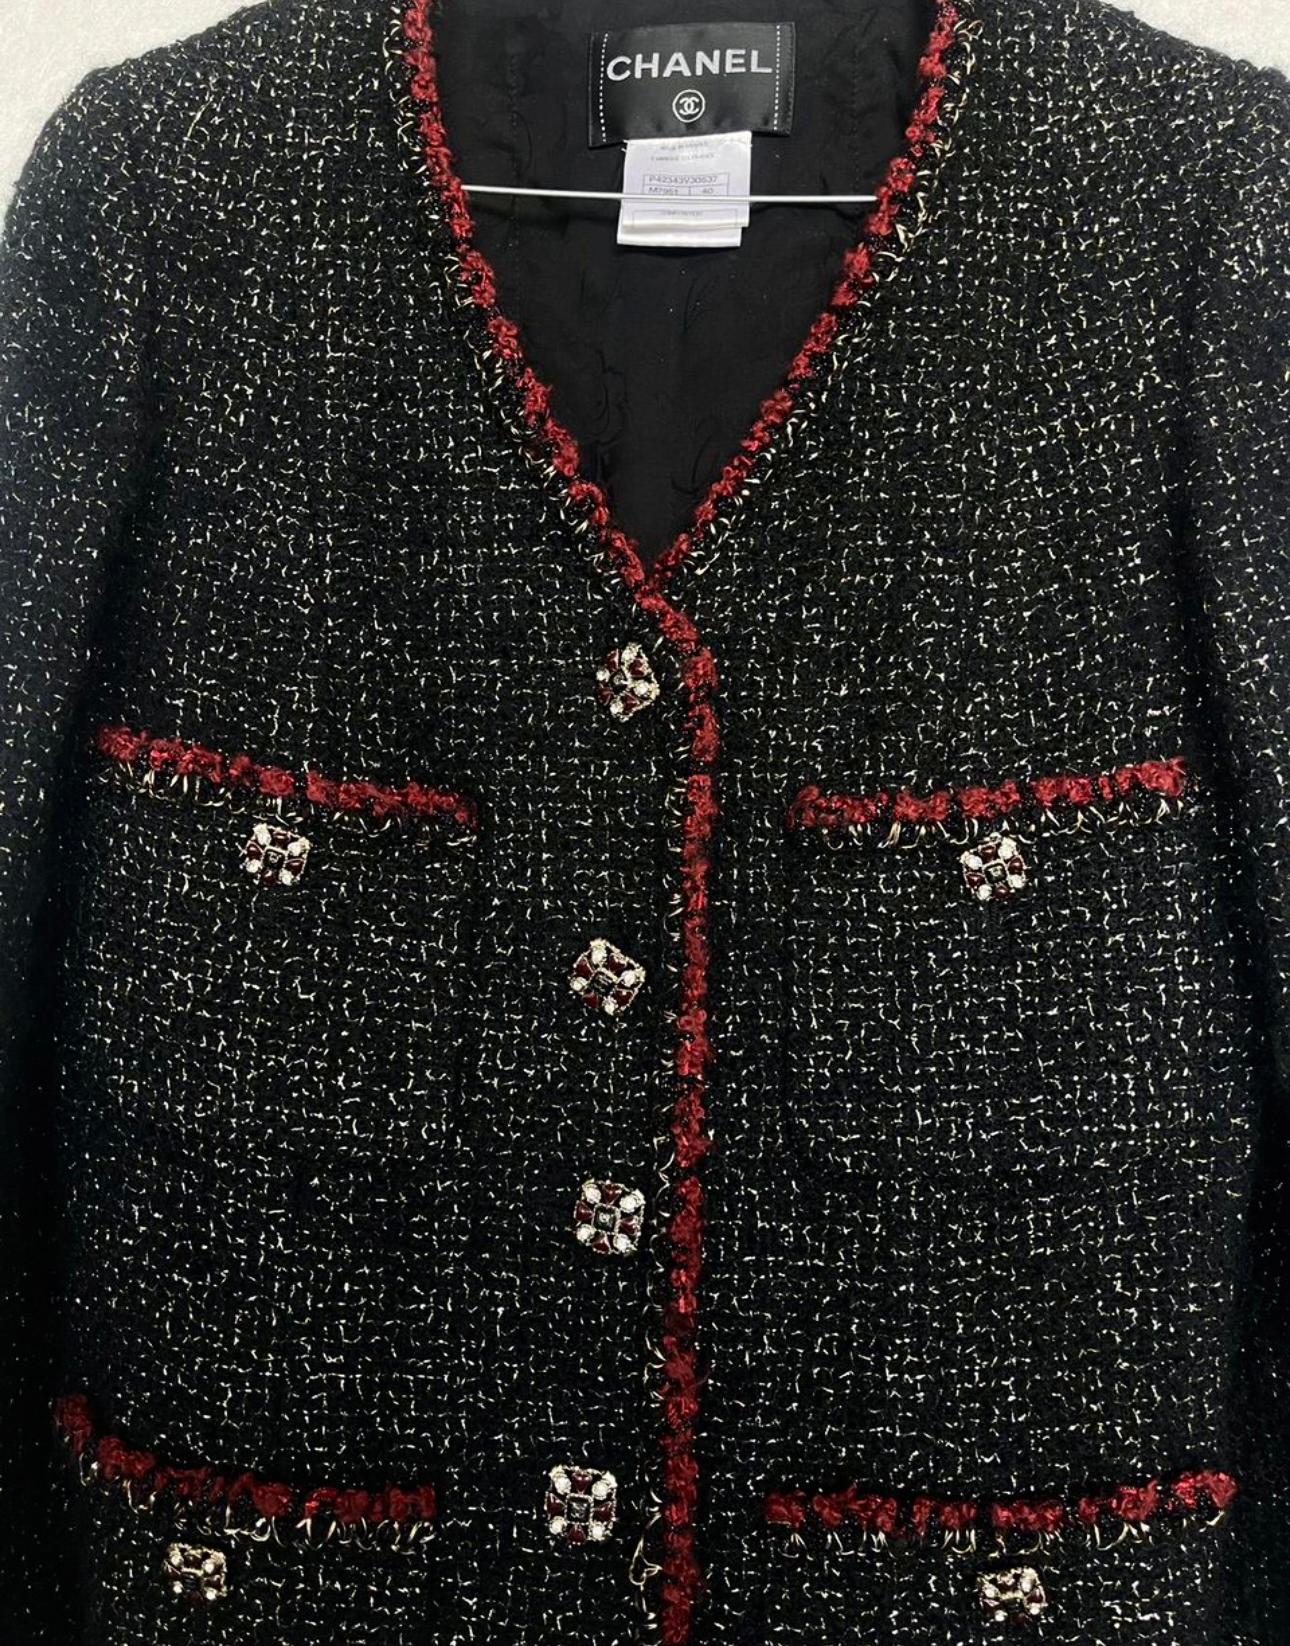 Chanel Iconic CC Jewel Buttons Black Tweed Jacket  For Sale 6